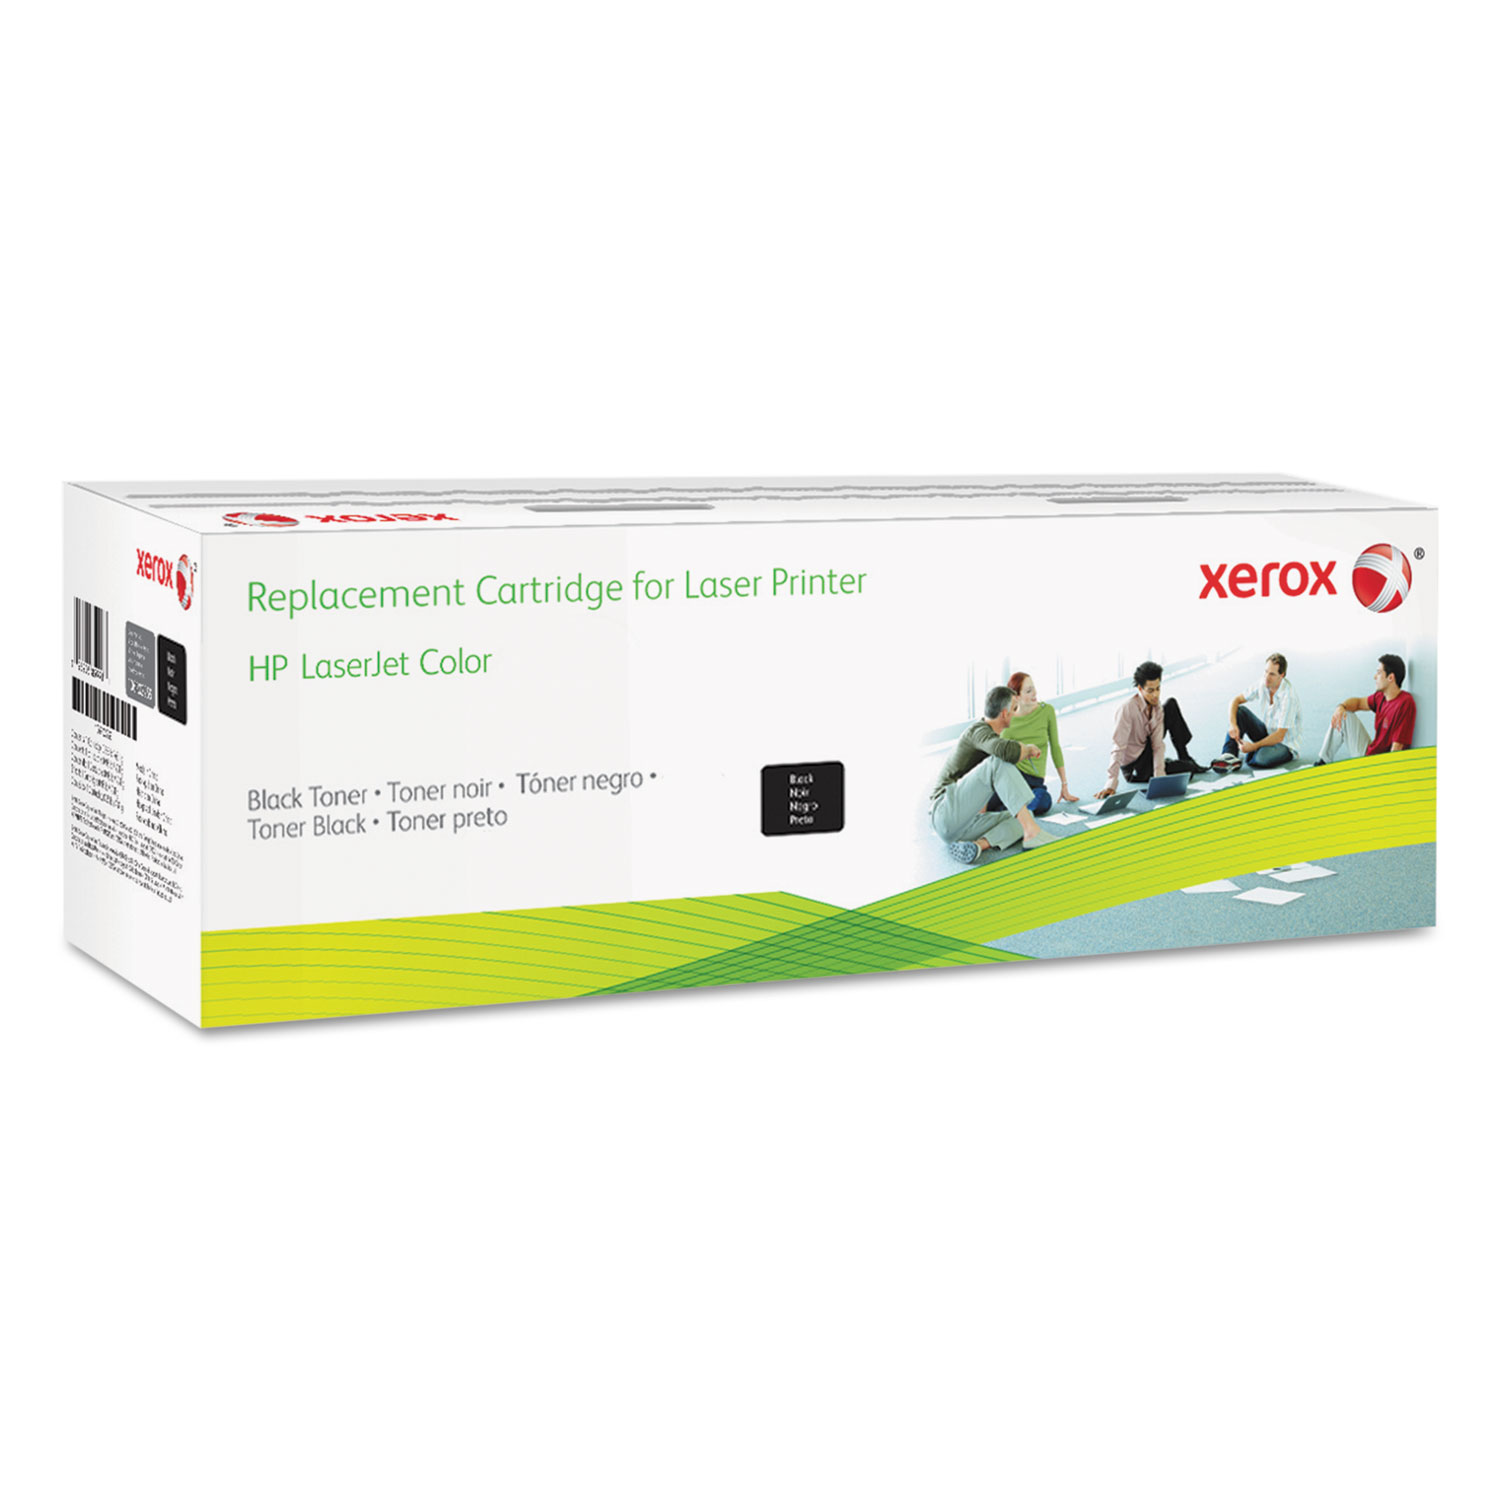  Xerox 006R03251 006R03251 Remanufactured CF380A (312A) Toner, 2500 Page-Yield, Black (XER006R03251) 